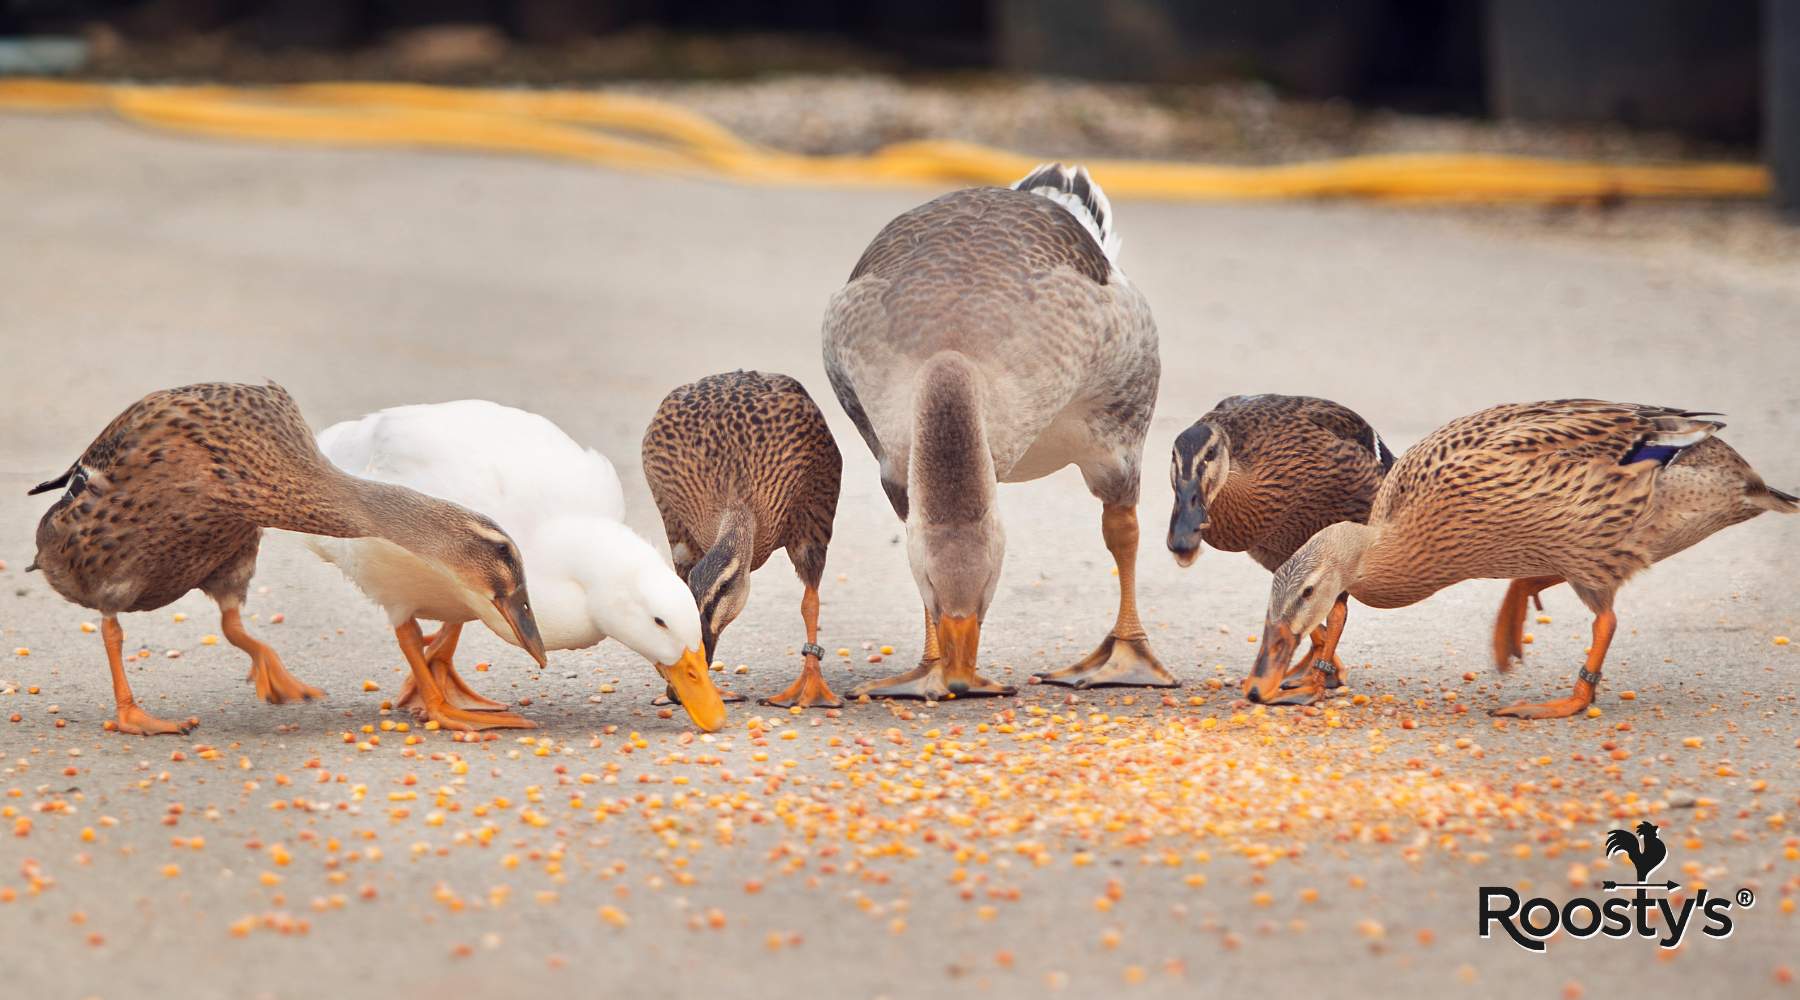 Can Ducks Eat Chicken Feed? A Guide to Feeding Ducks and Their Dietary Needs